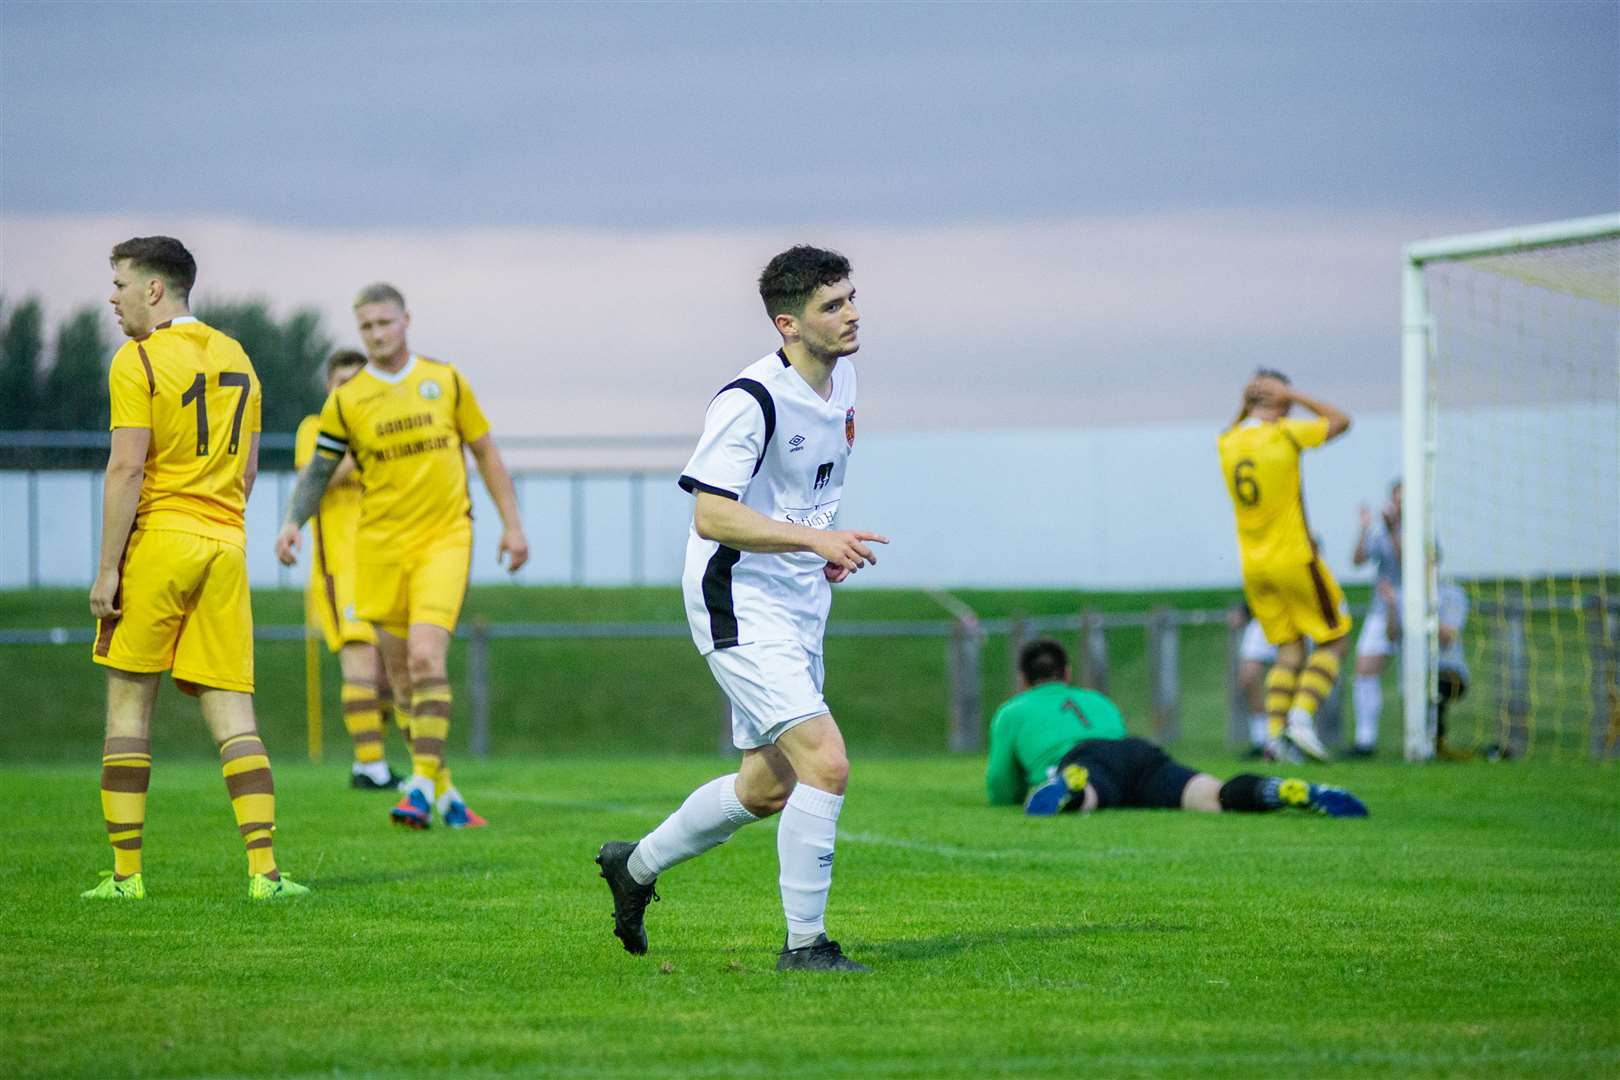 Jack Brown celebrates one of his six goals this season for Rothes. Picture: Daniel Forsyth..